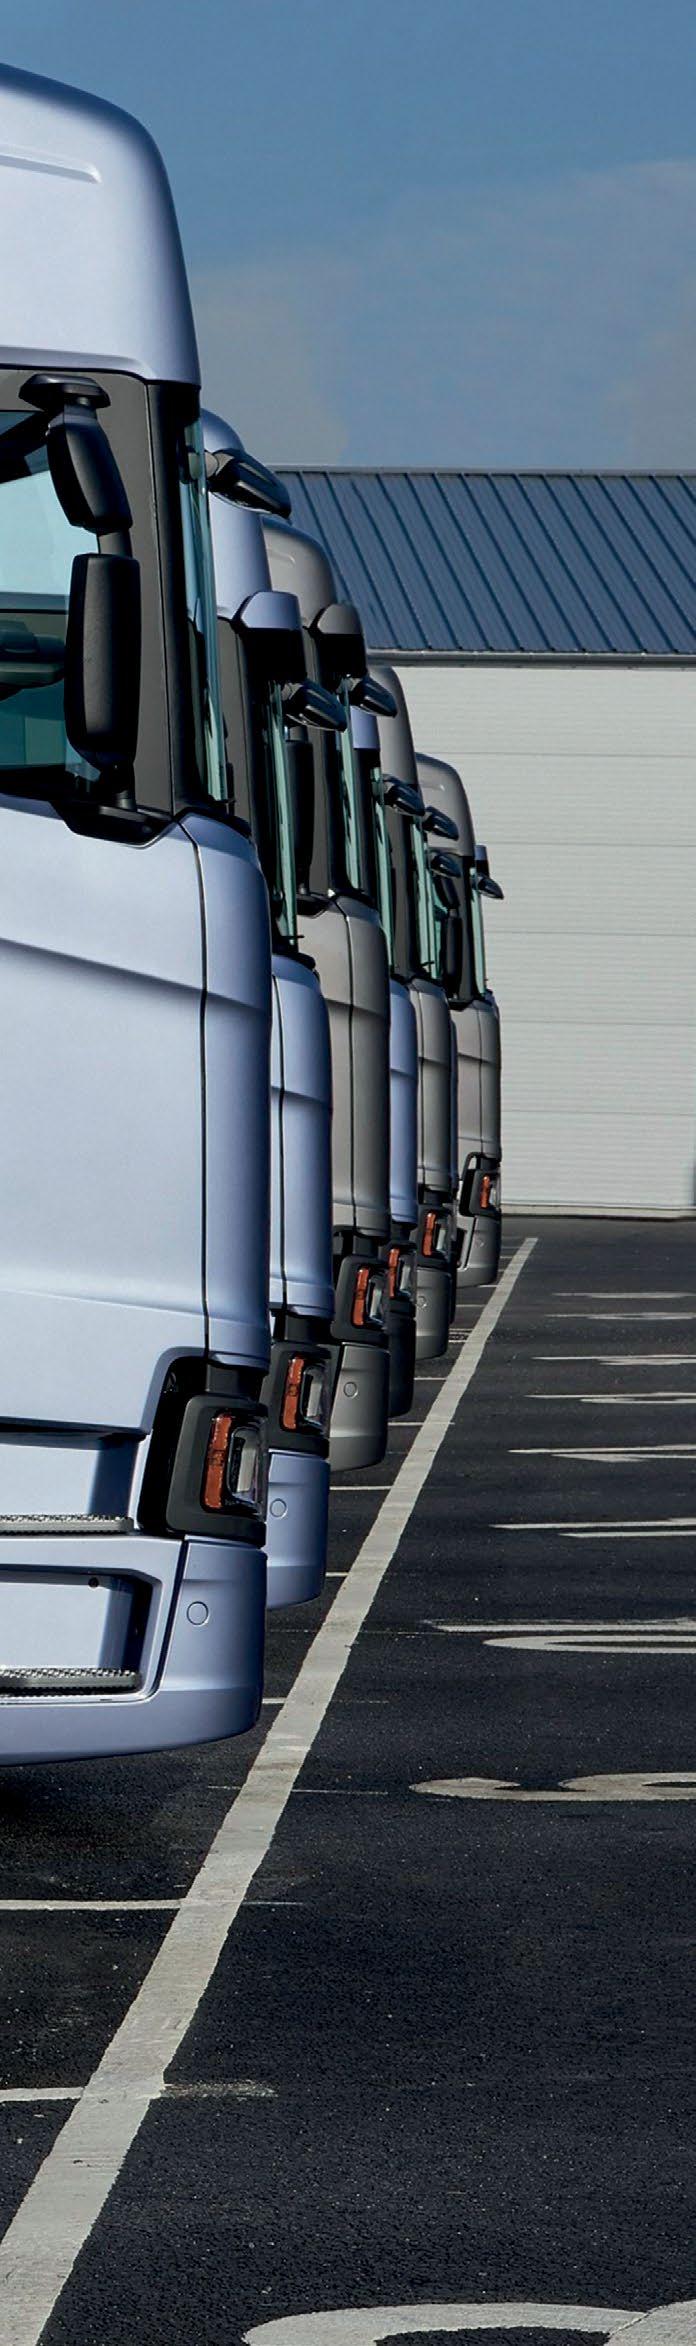 Five reasons to become an LGV driver 1.